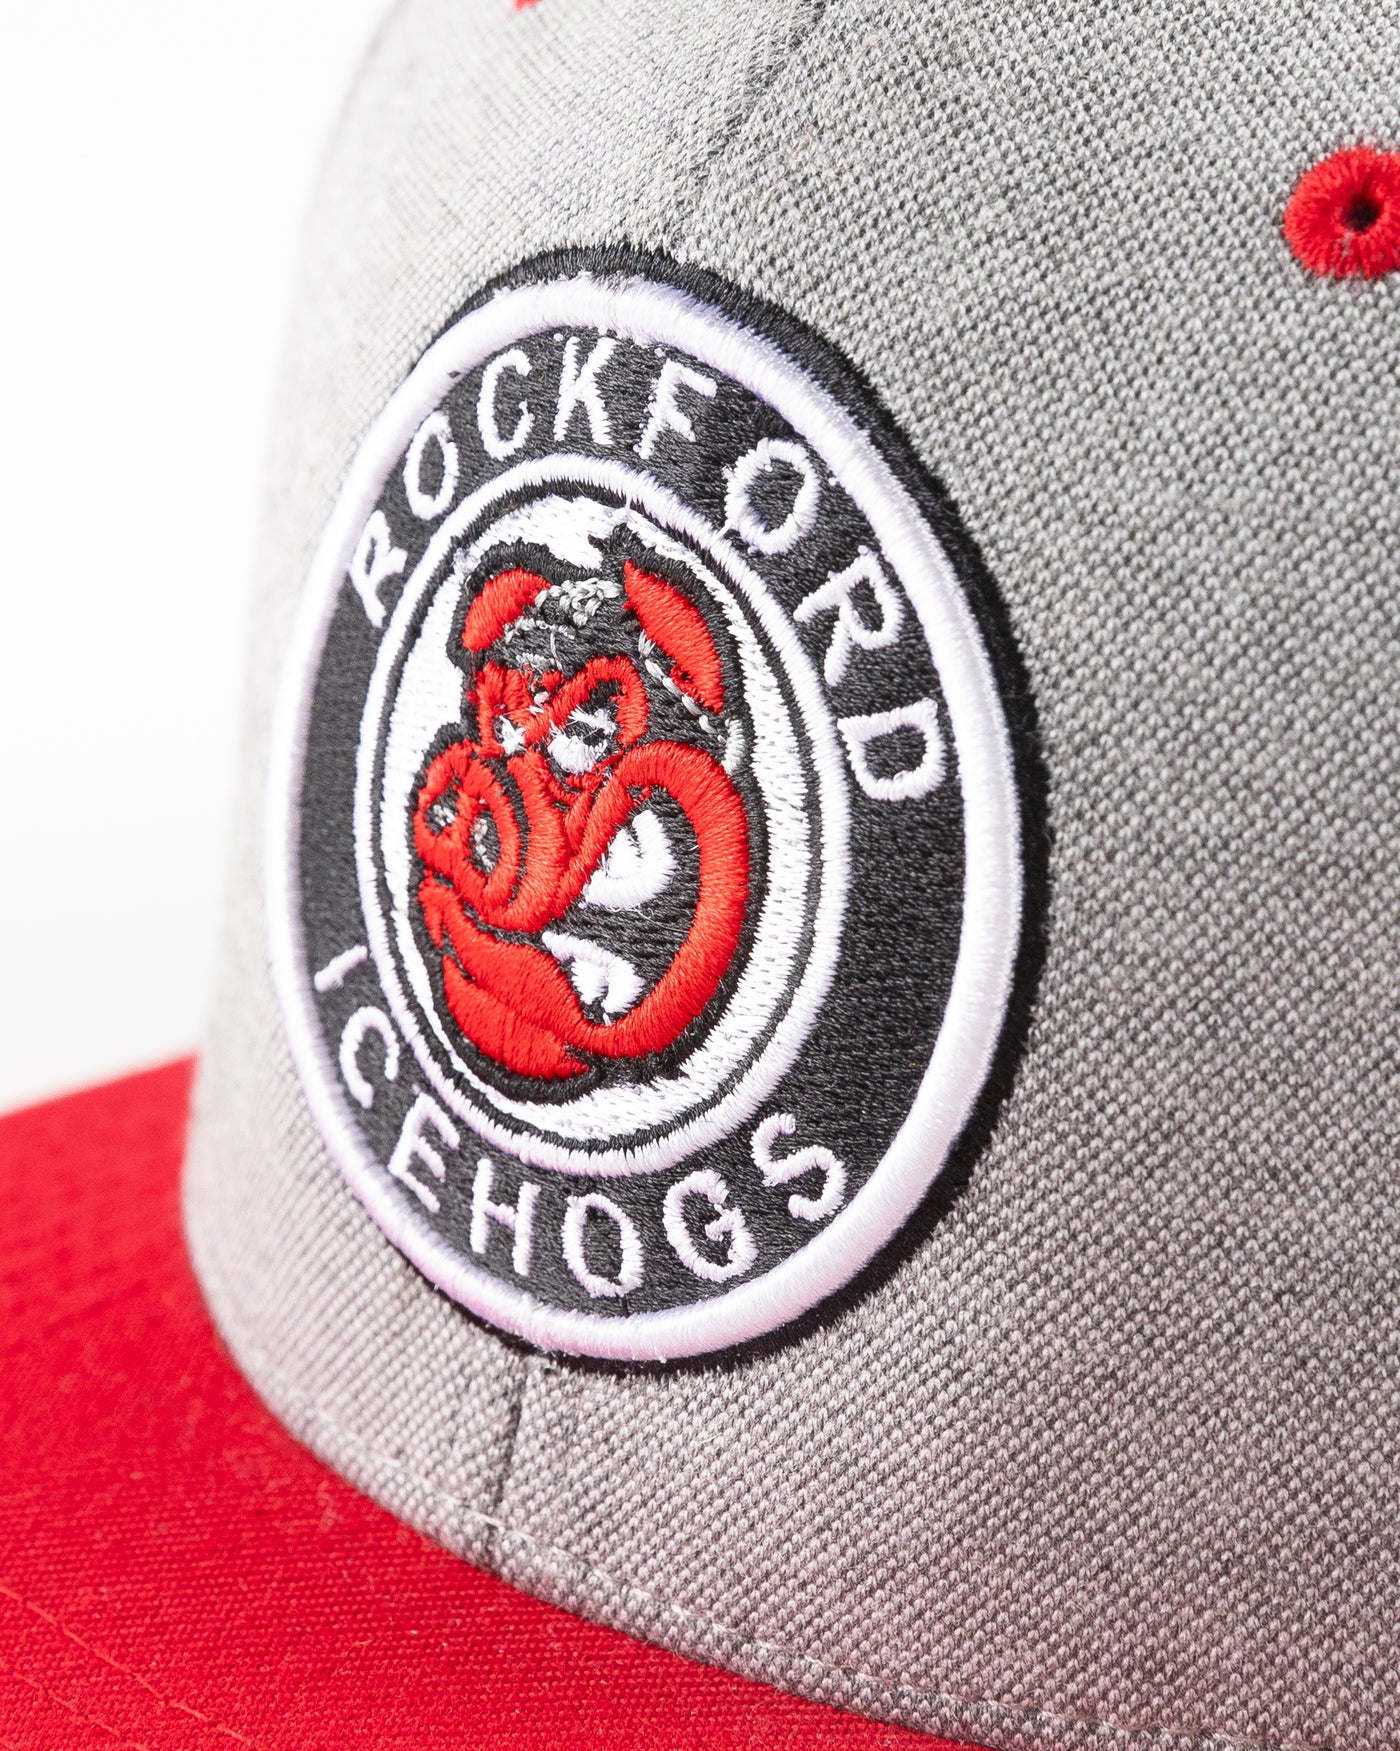 grey Rockford IceHogs snapback with red brim and embroidered IceHogs patch - detail lay flat